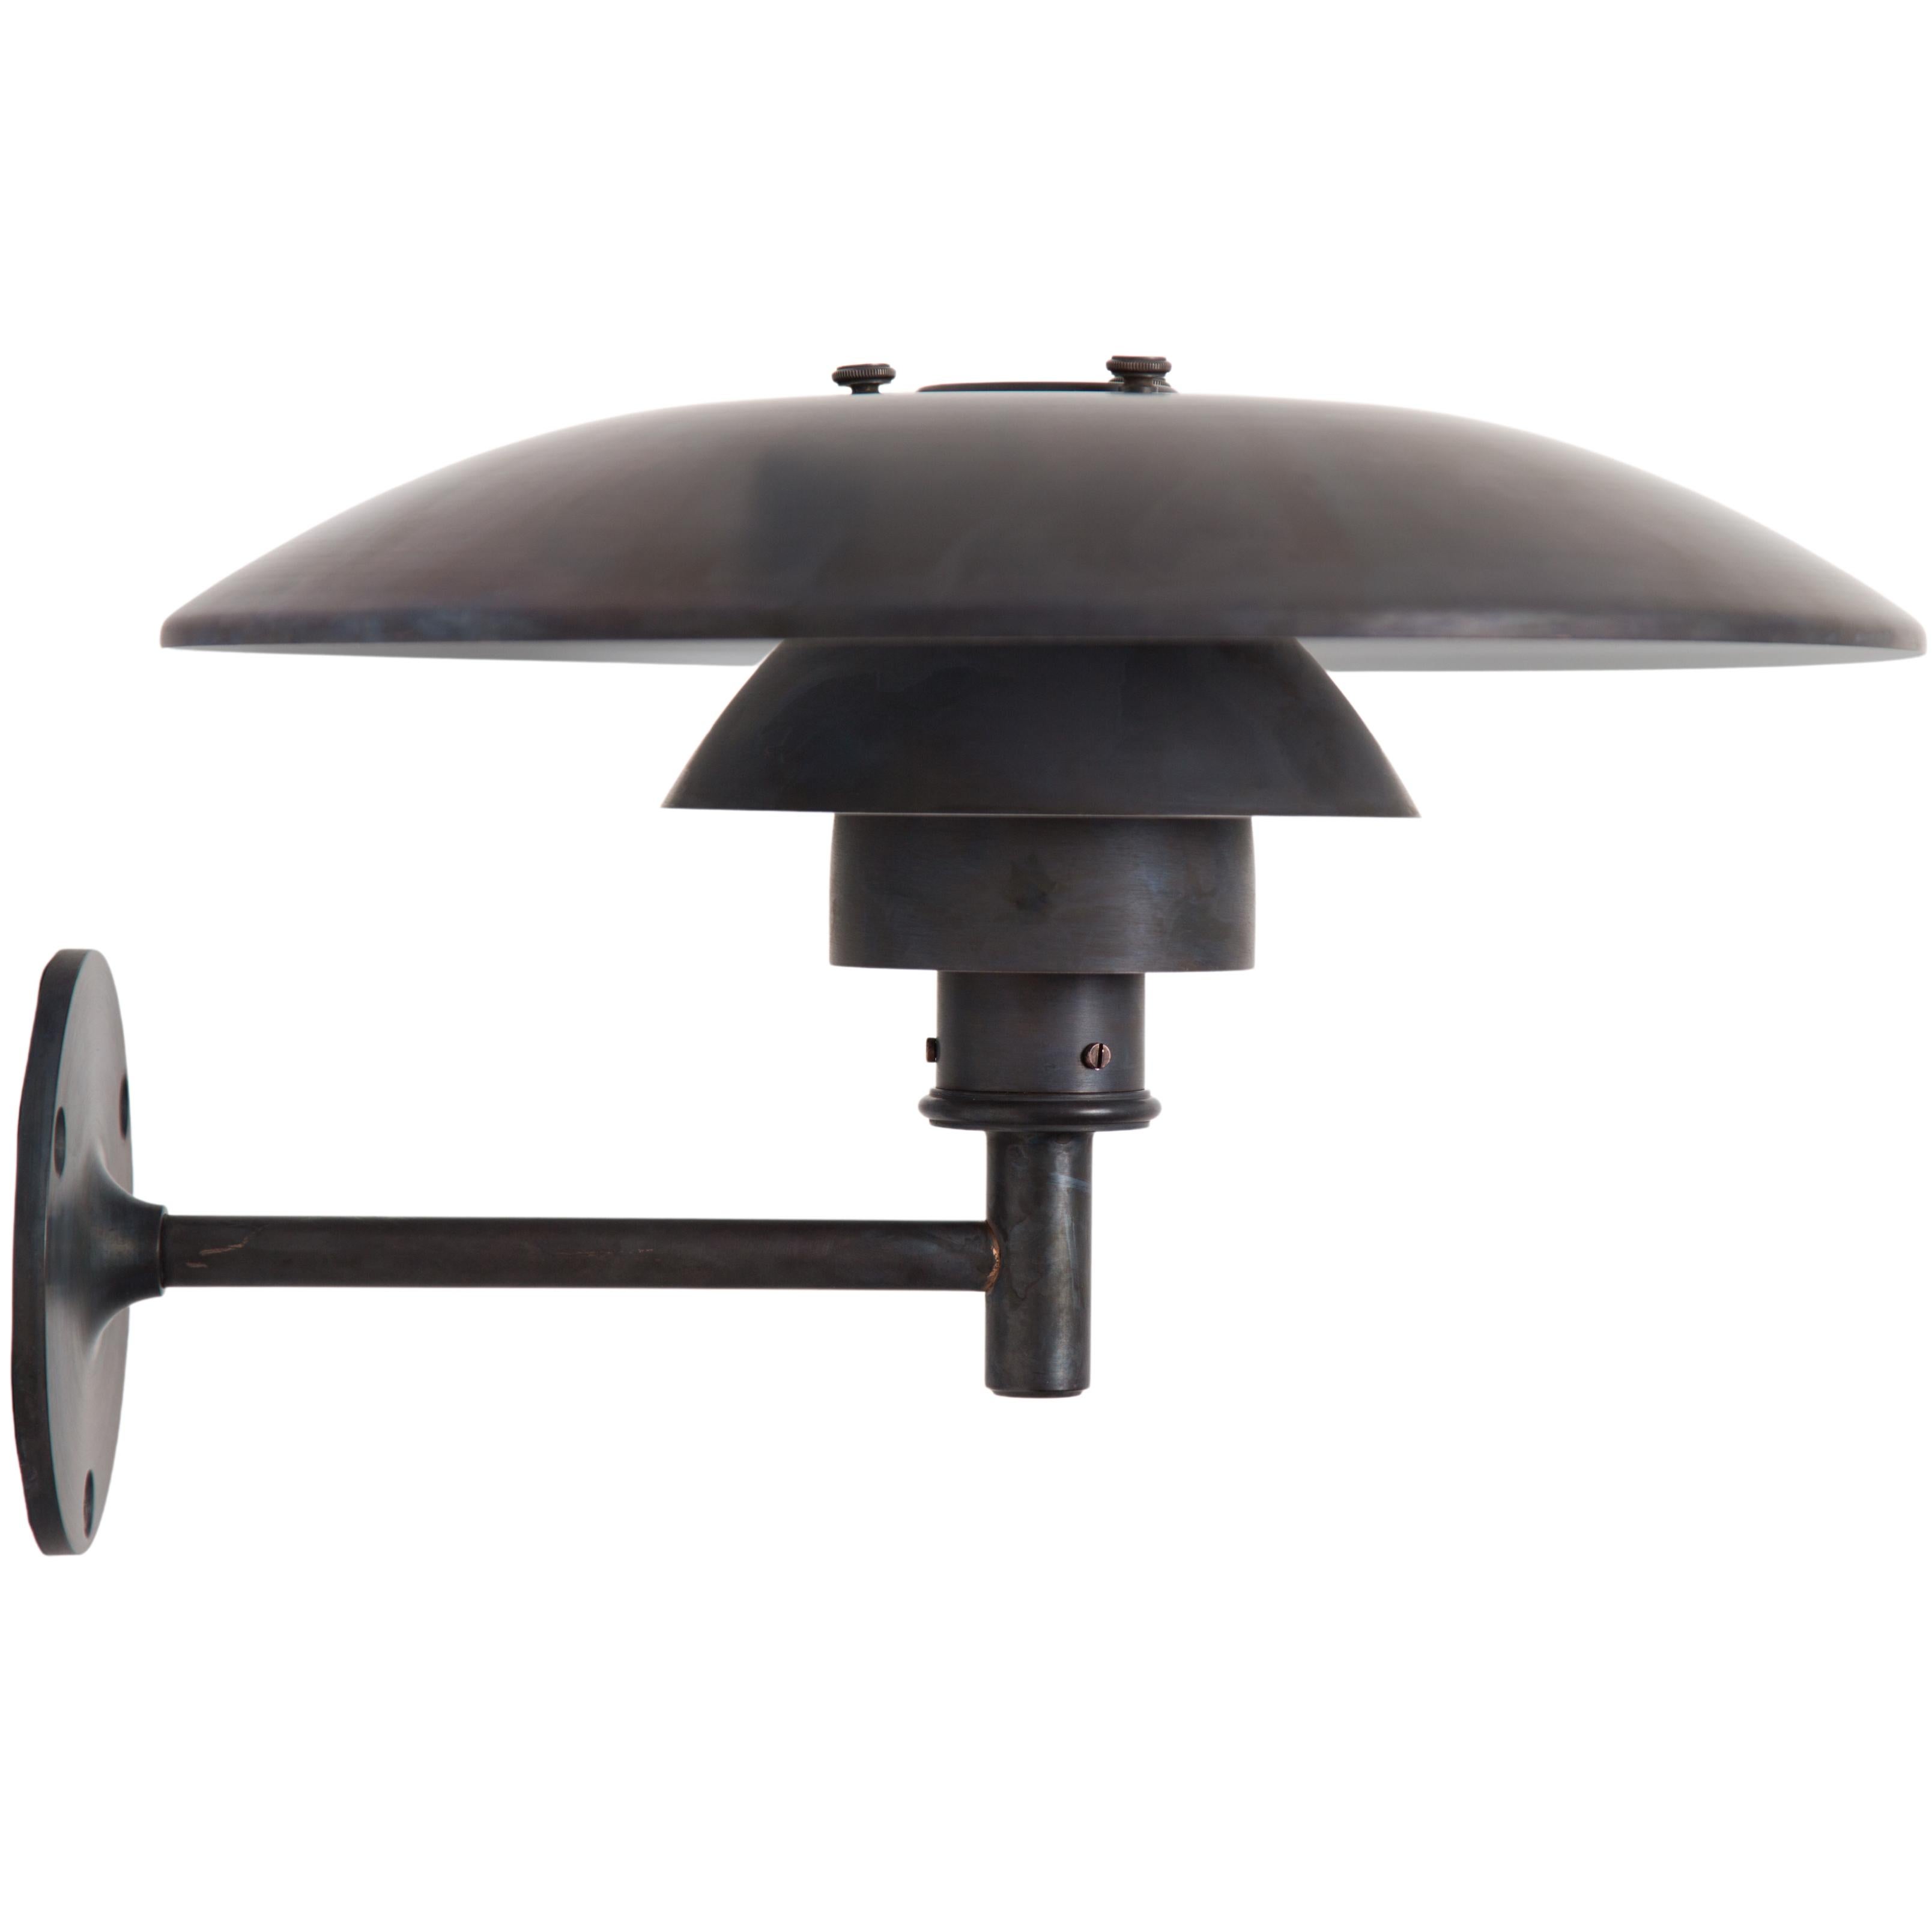 Large Poul Henningsen 'Ph Wall' Darkly Patinated Outdoor Lamp for Louis Poulsen For Sale 9